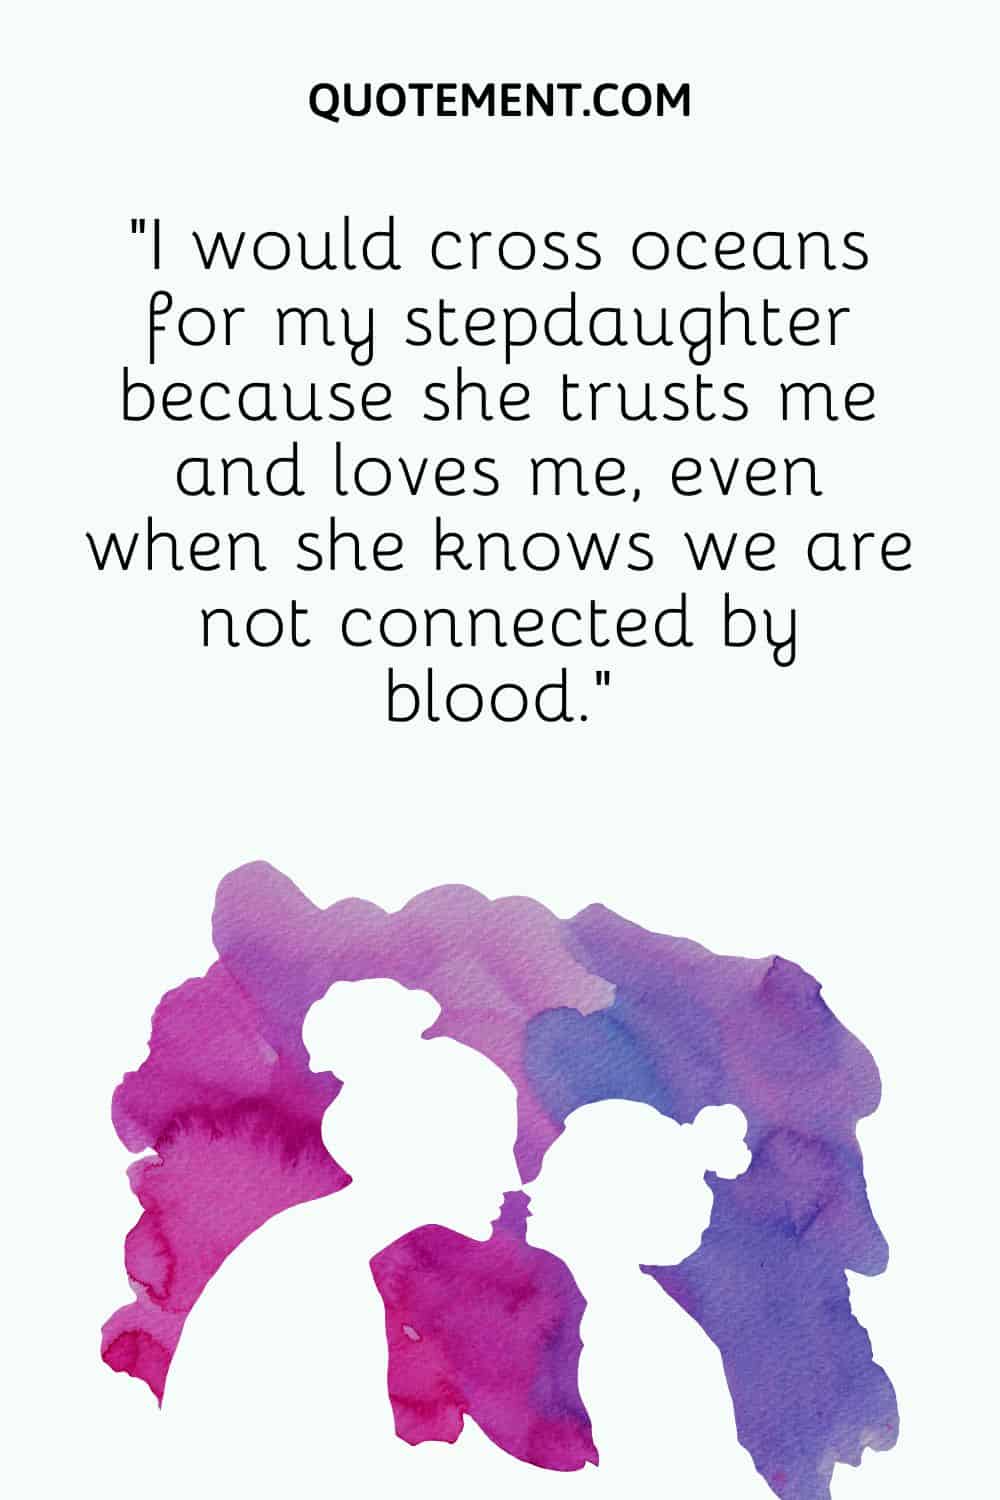 I would cross oceans for my stepdaughter because she trusts me and loves me, even when she knows we are not connected by blood.